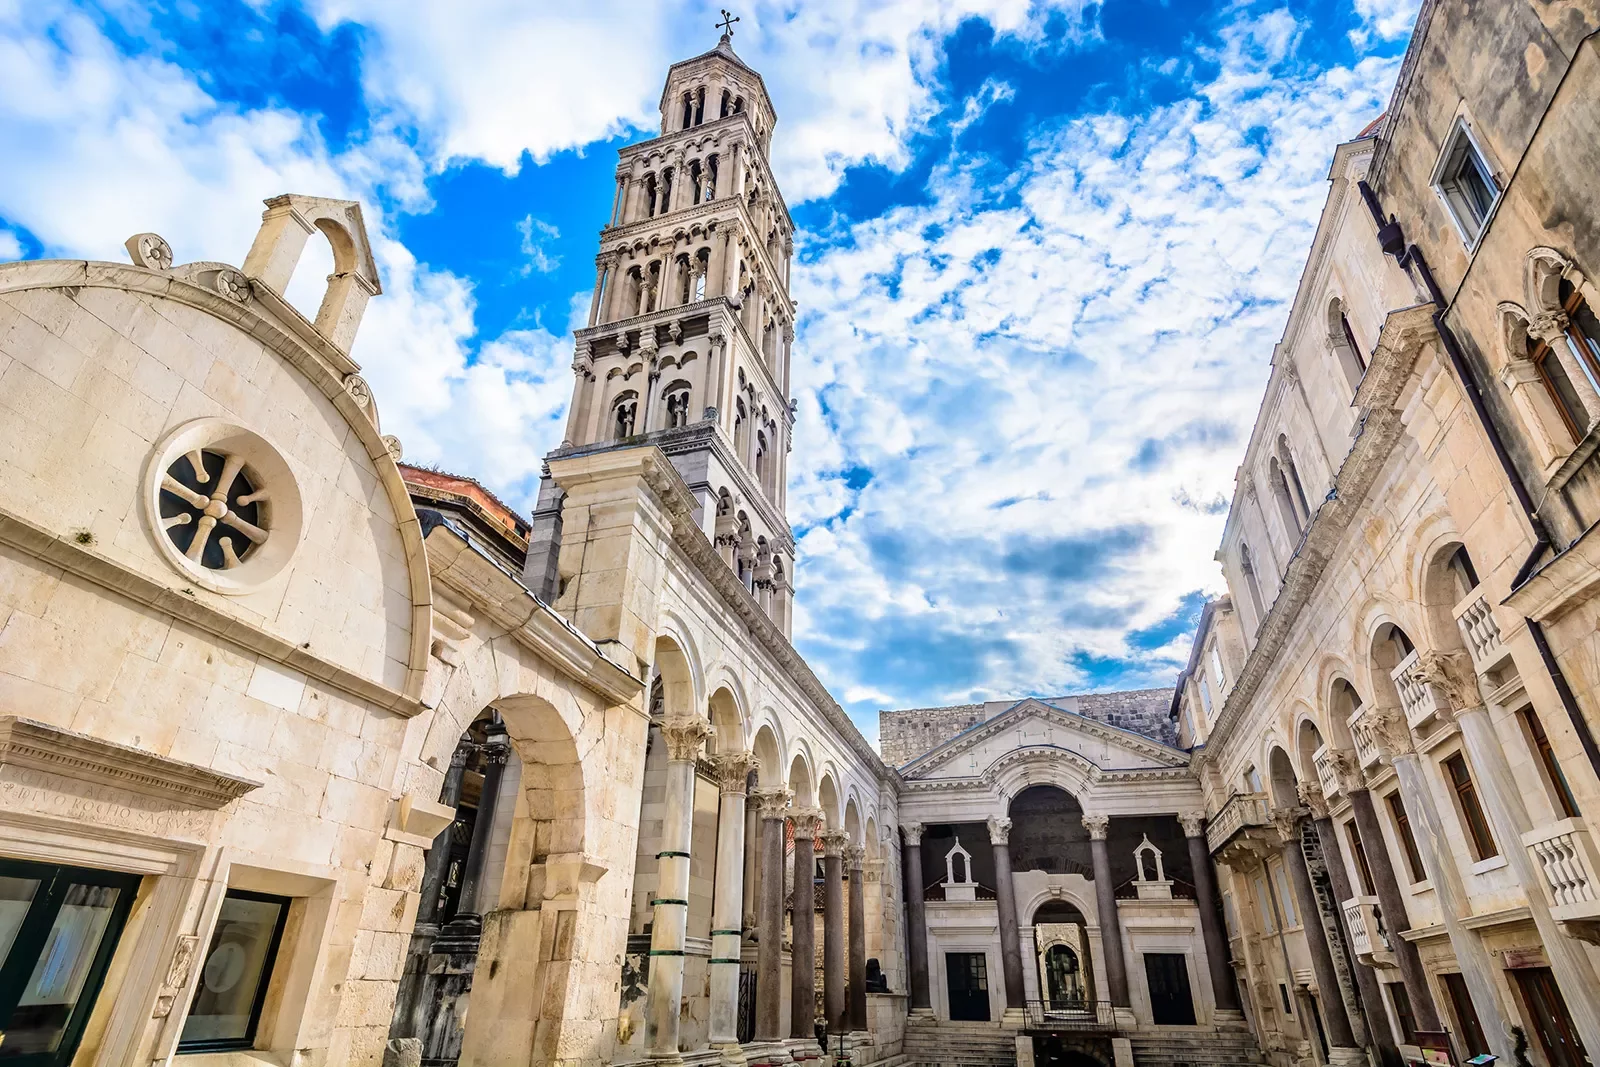 Ground shot of Diocletian's Palace in Split, Croatia.